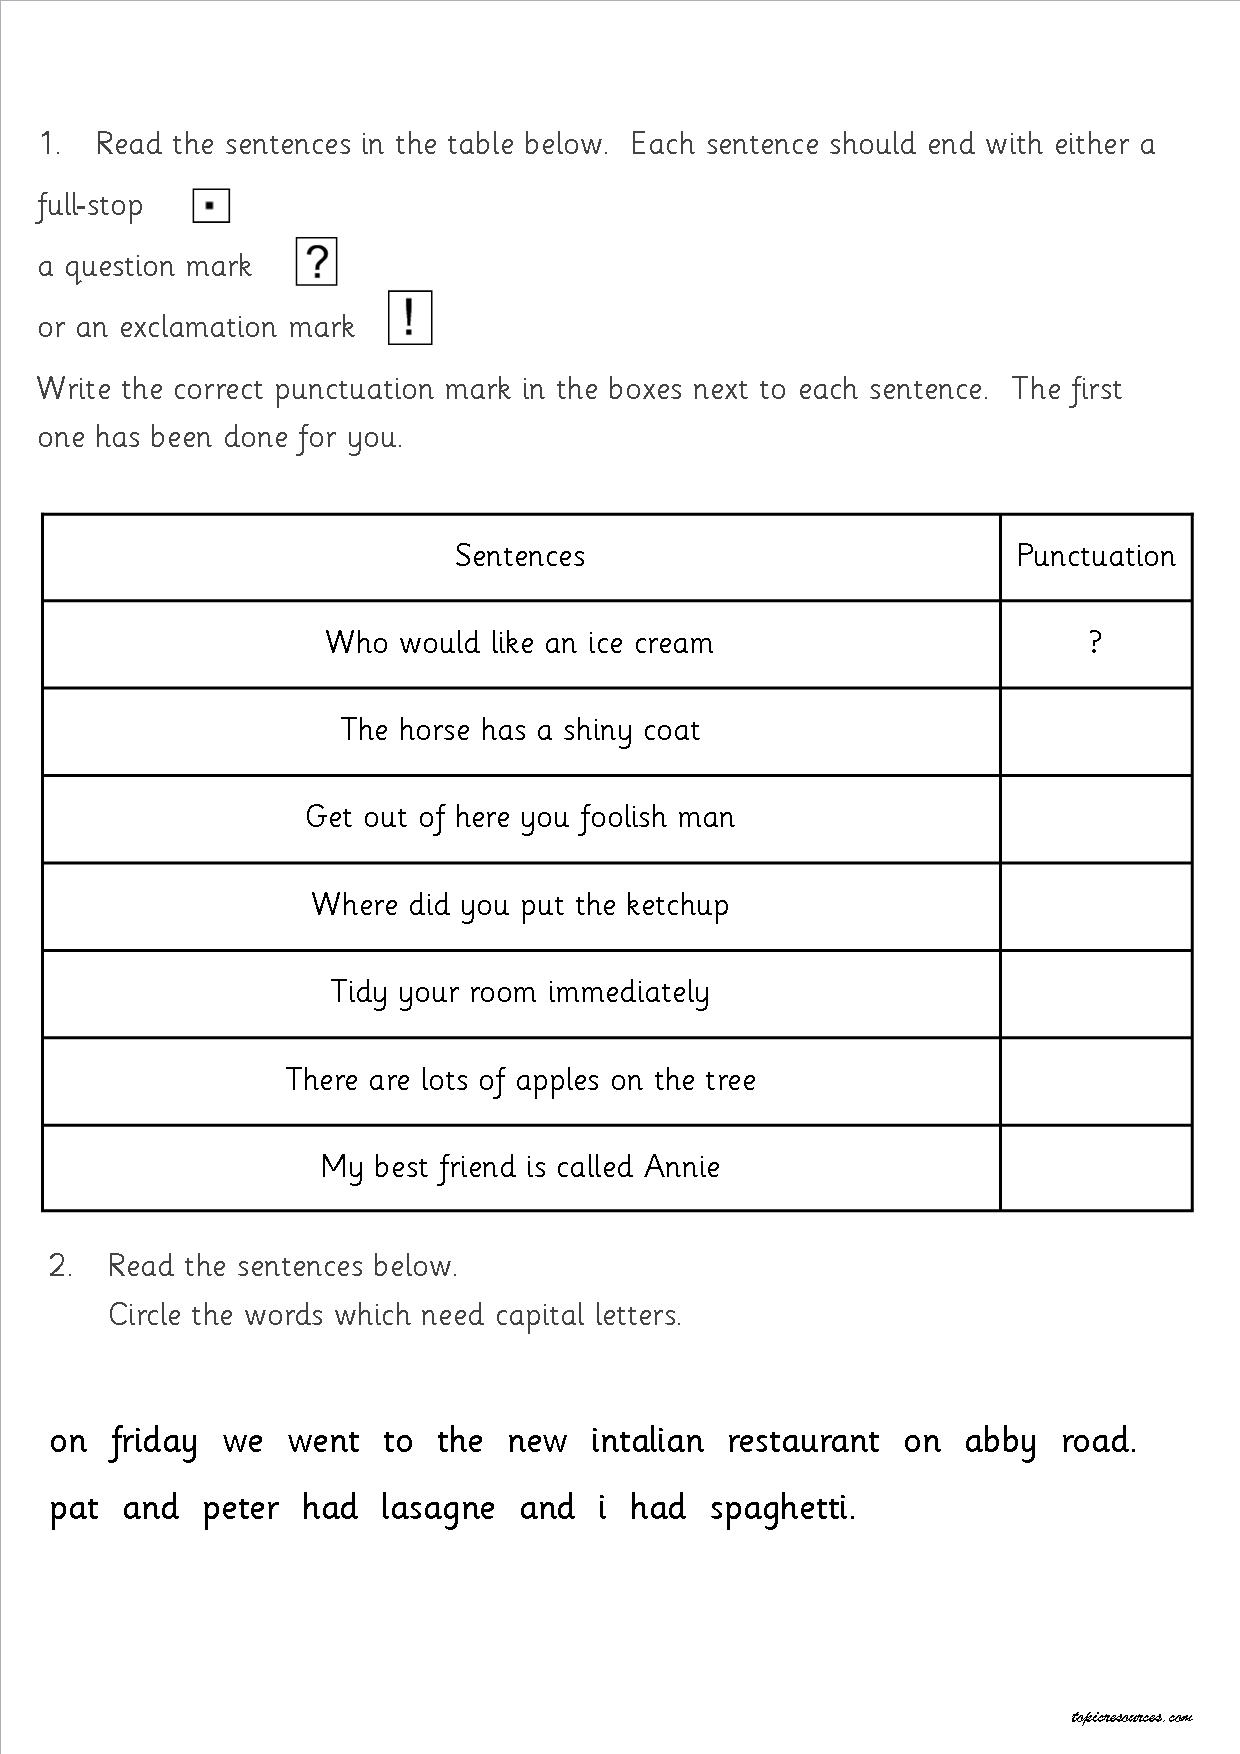  Year 6 Grammar Revision Worksheets Free Download Goodimg co